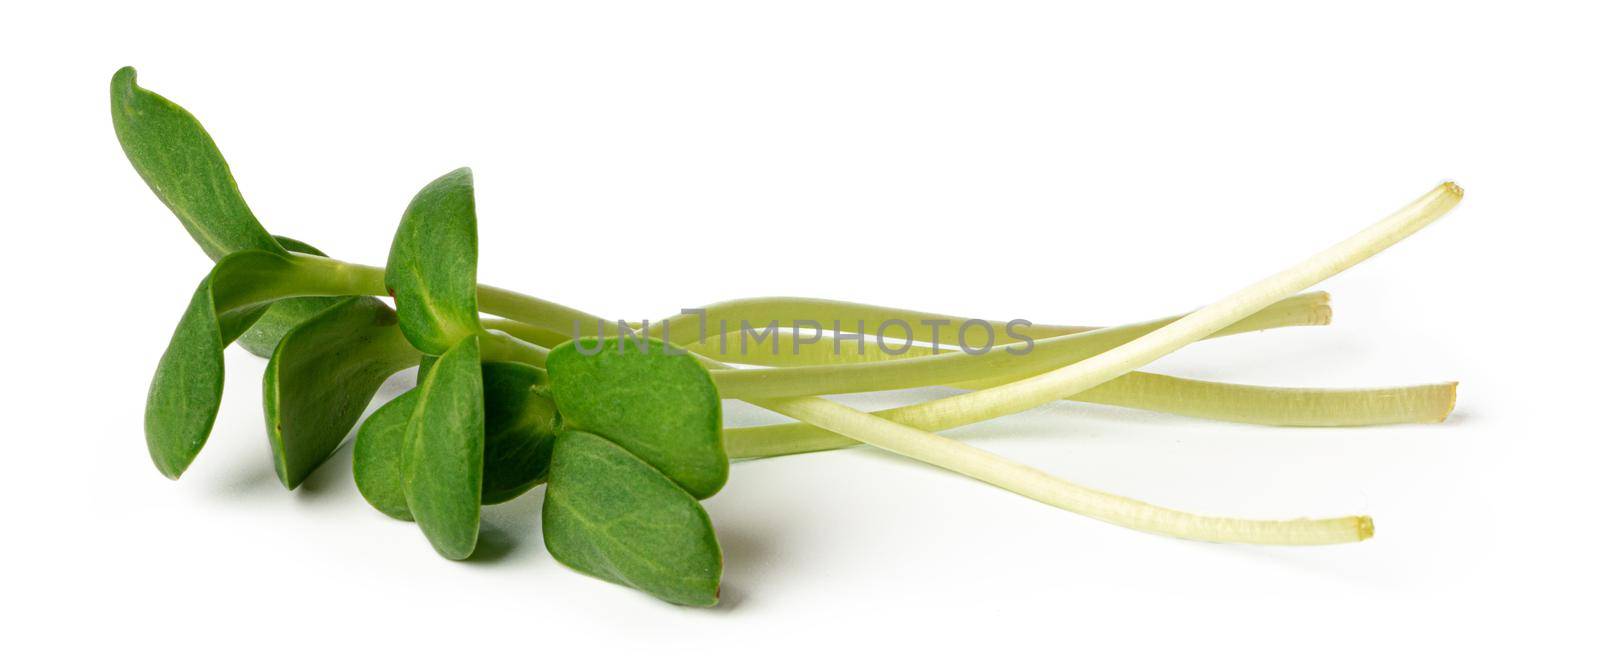 Bunch of micro green sprouts isolated on white background, close up